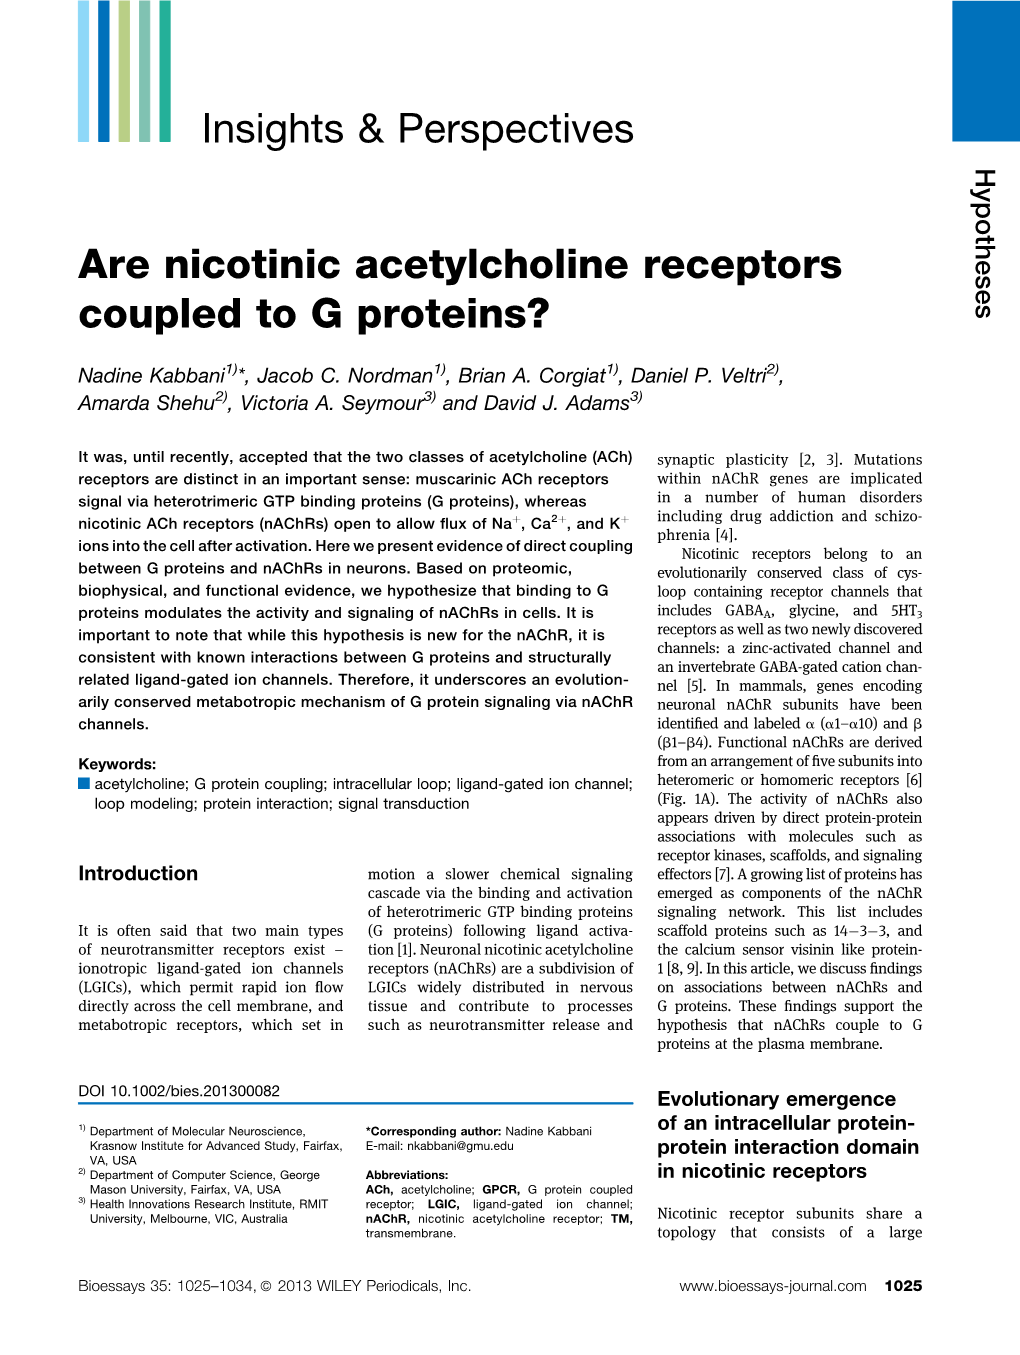 Are Nicotinic Acetylcholine Receptors Coupled to G Proteins?